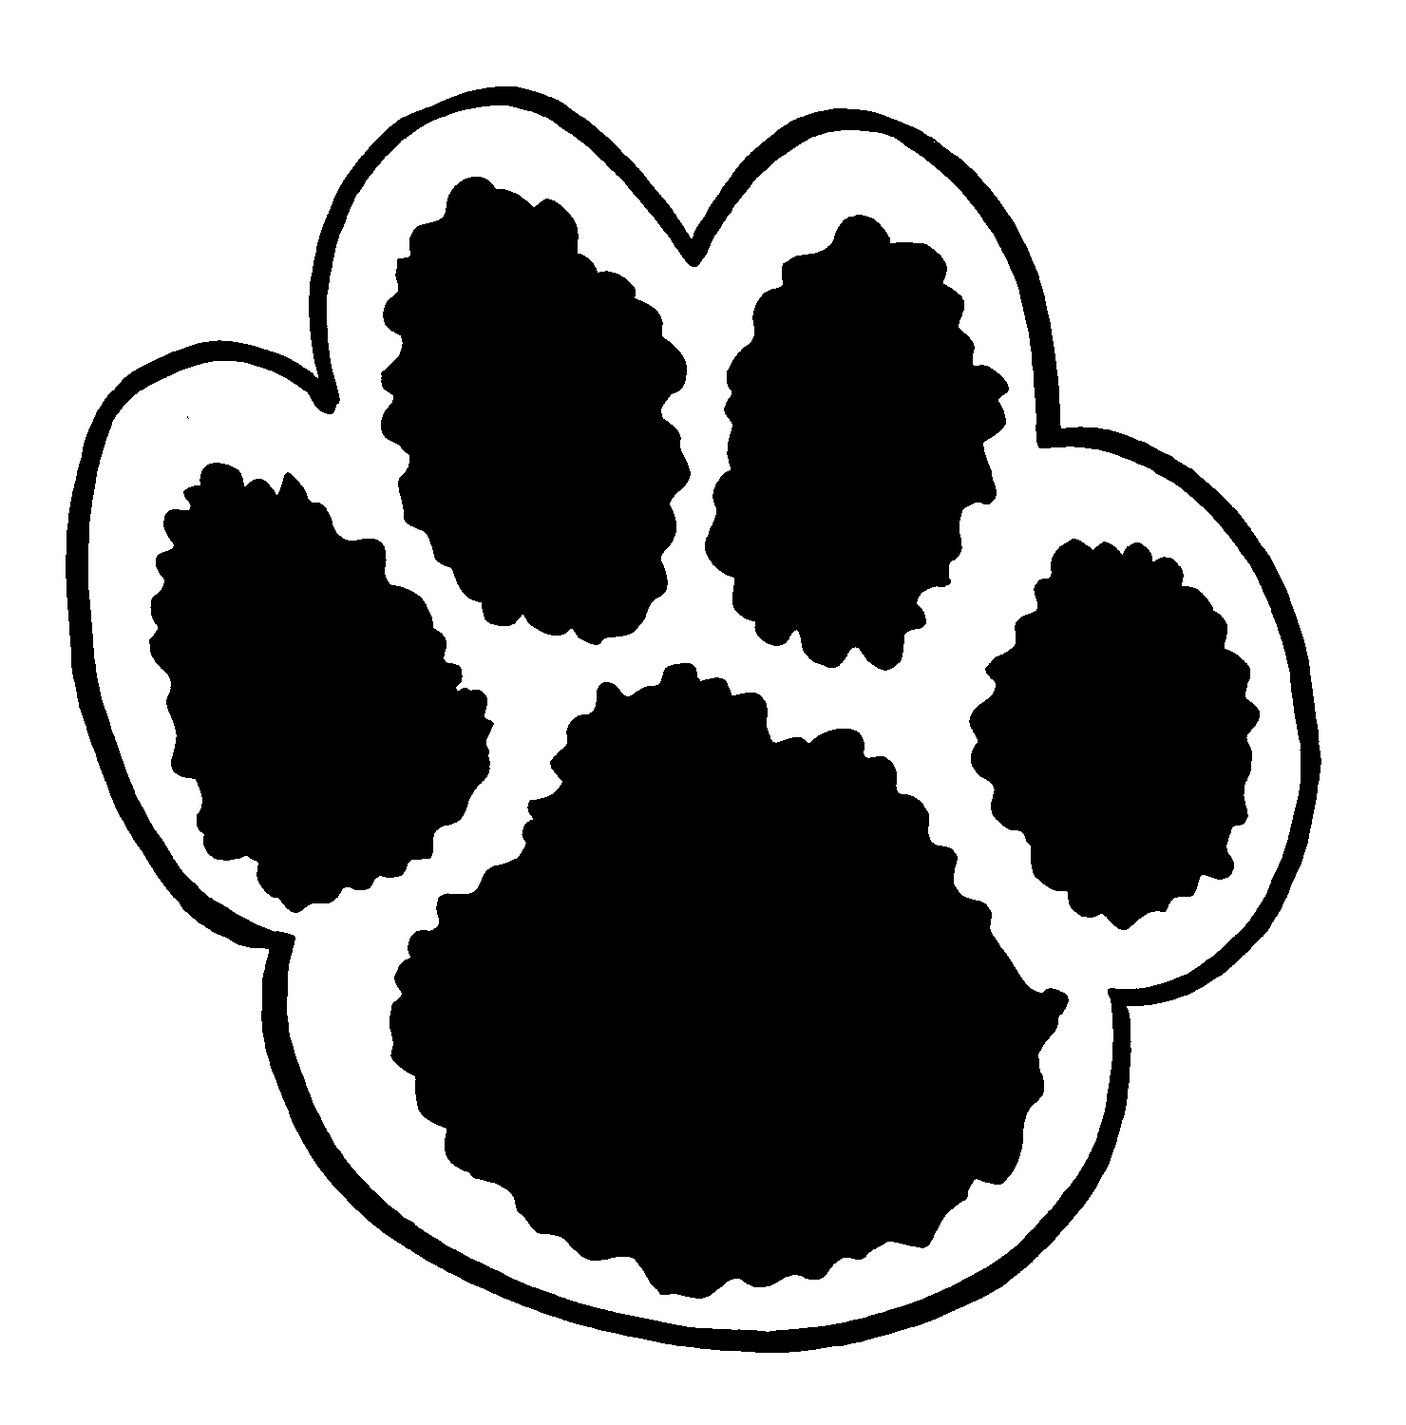 Grizzly bear paw print clipart.